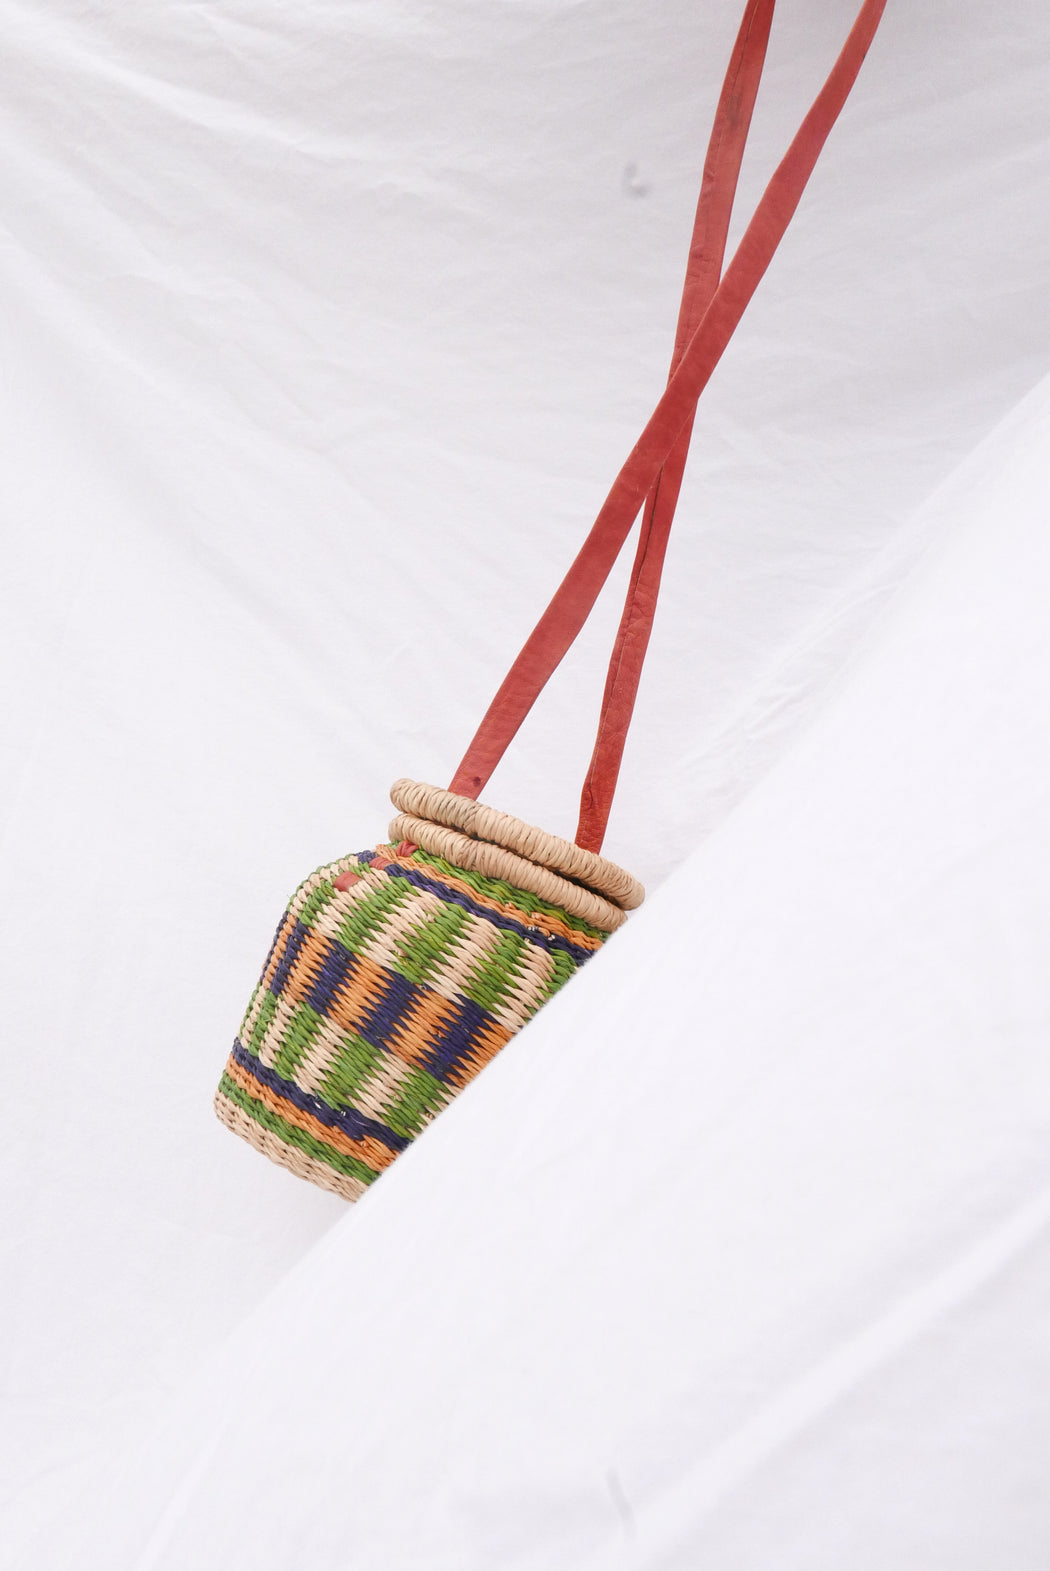 The orange Alobahe handbag is handwoven with straw called Kinkahe in Sherigu, Ghana. The shape is versatile and opens from the lid lifted vertical with an adjustable leather strap that can be worn as a crossbody or a handheld bag. This product supports a community with employment, educational opportunities for the children and improve the work environment.